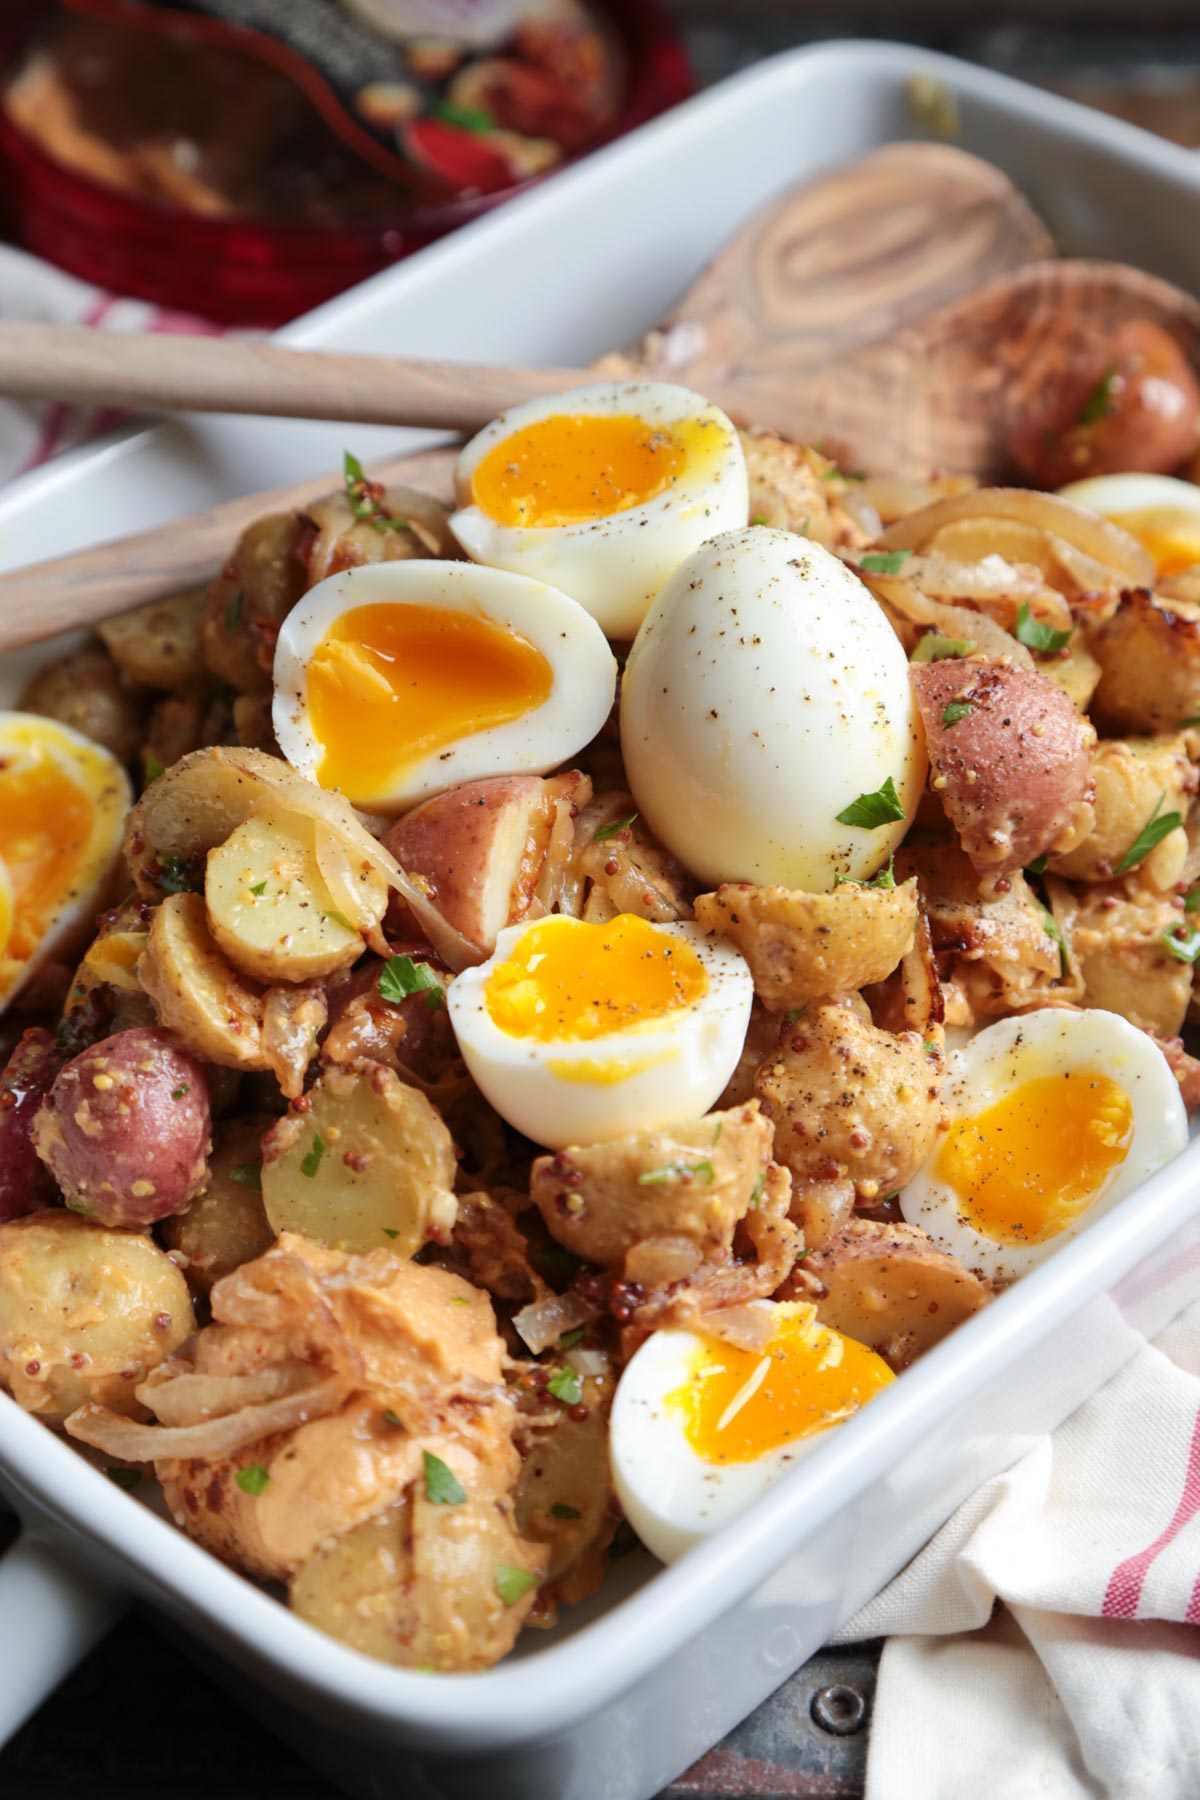 Caramelized Onion and Hummus Potato Salad with Soft Boiled Eggs